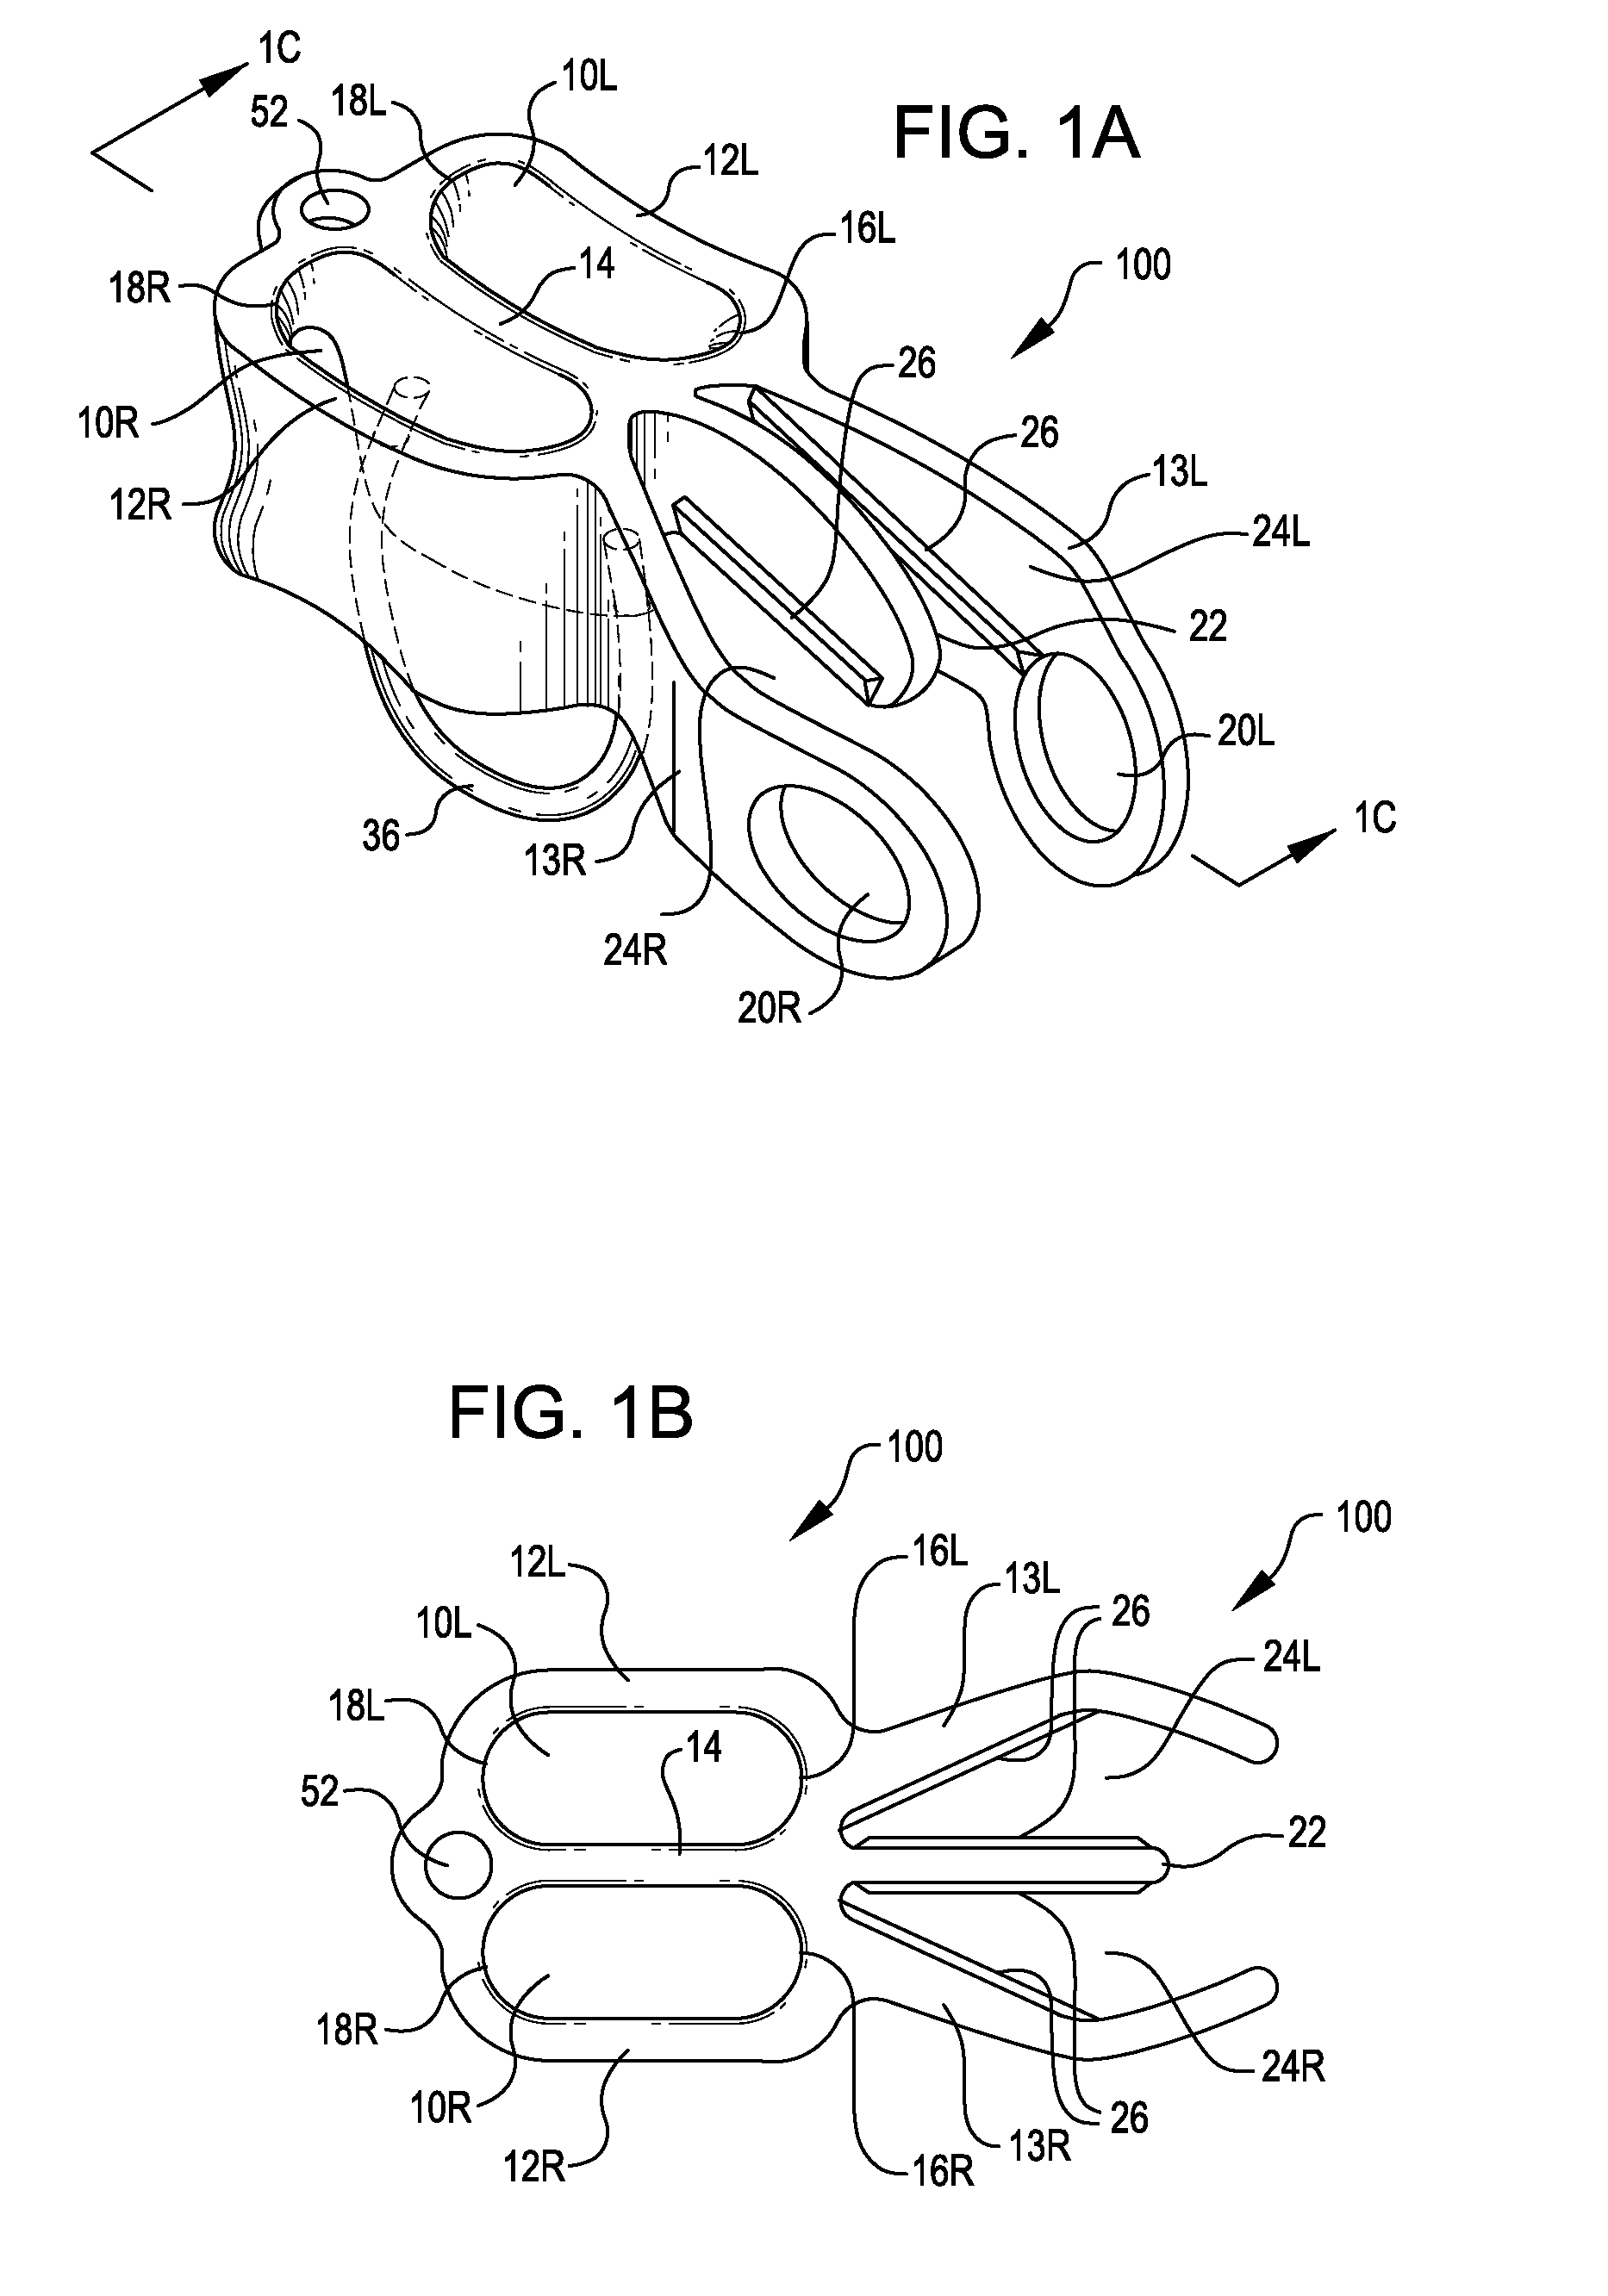 Rope handling device with secondary locking feature